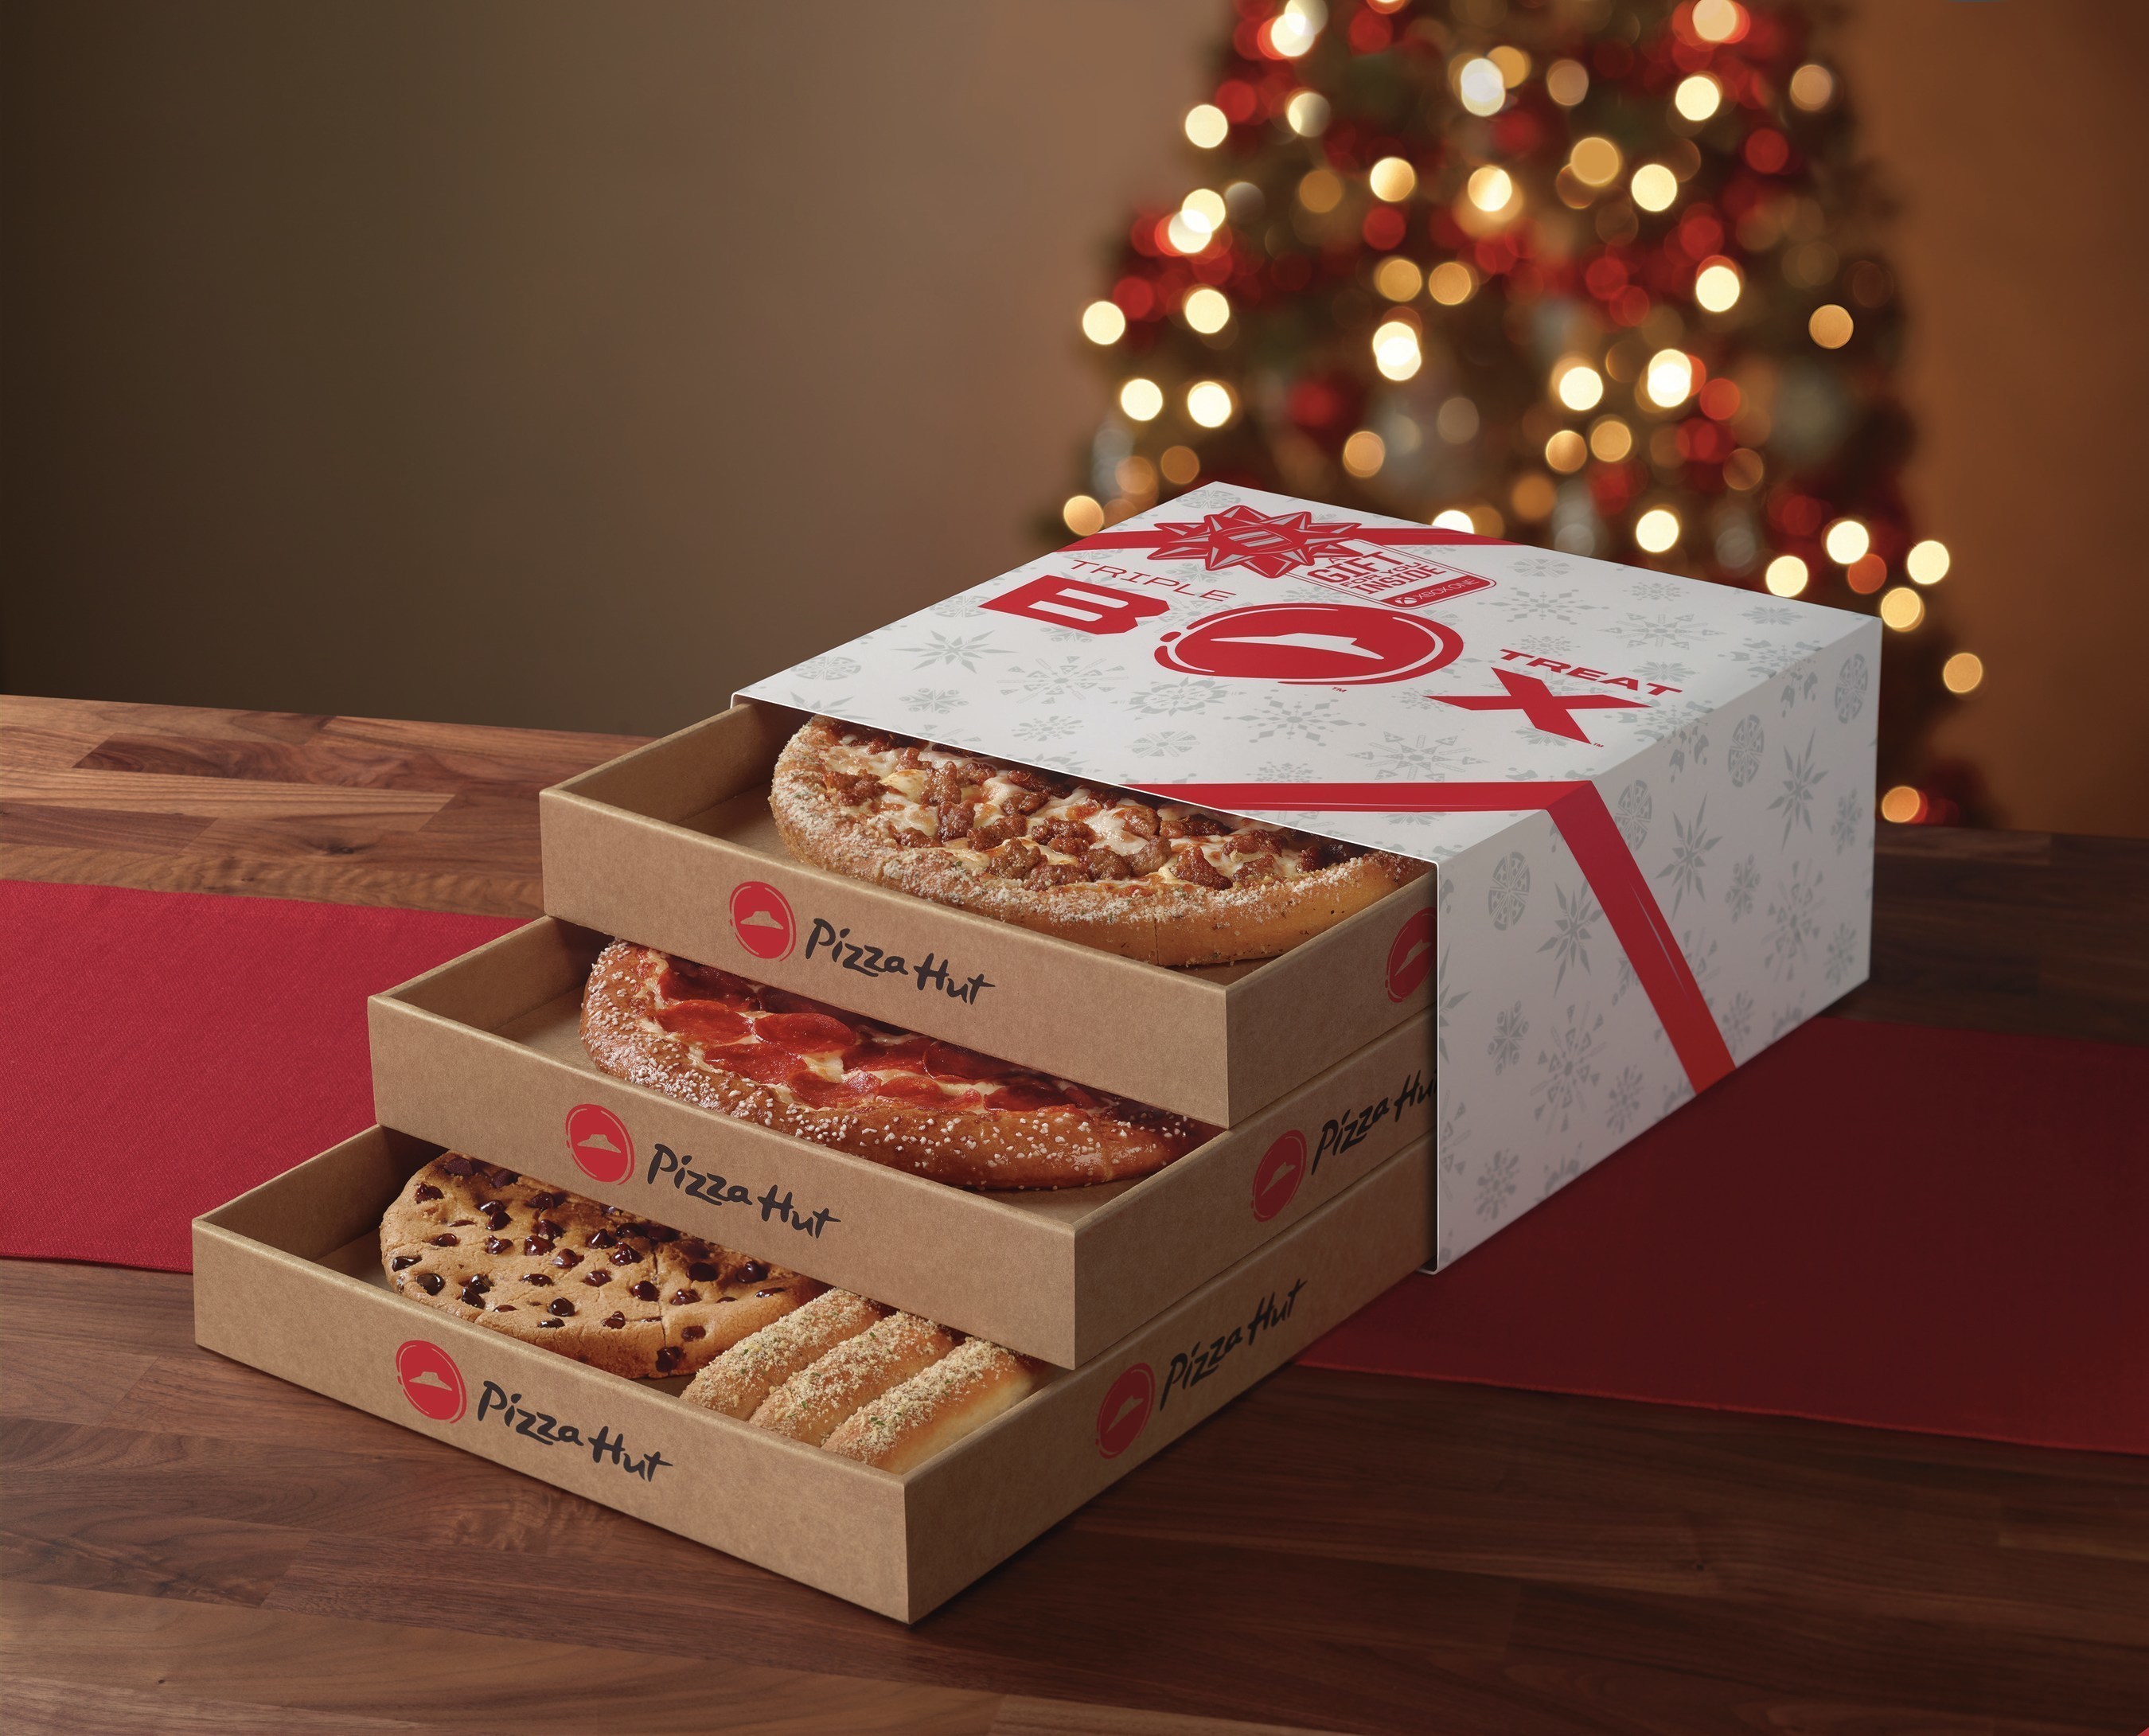 Perfect for get-togethers with friends and families looking to extend the fun of the holidays, the tri-level, holiday-themed Triple Treat Box from Pizza Hut will be available starting Nov. 7 for just $19.99 and includes two medium one-topping pizzas (available on Hand Tossed, Thin N' Crispy(R) or Pan), an order of breadsticks, a Hershey's Ultimate Chocolate Chip Cookie and a chance to win holiday fun for the whole family with an Xbox One S and custom Pizza Hut red controller.